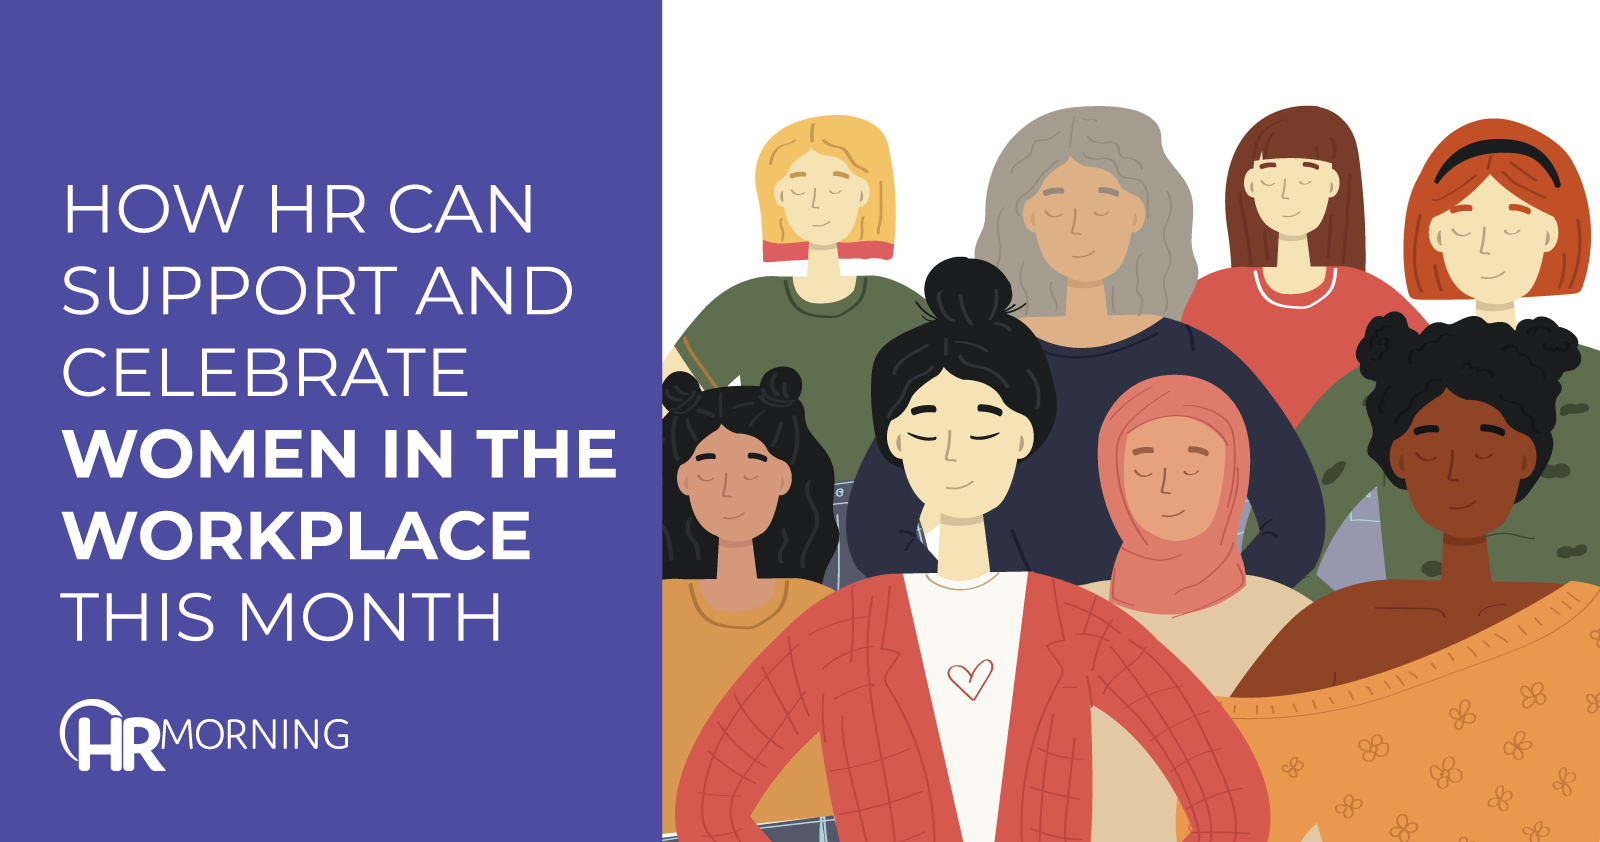 How HR can support and celebrate women in the workplace this month for International Women's Day